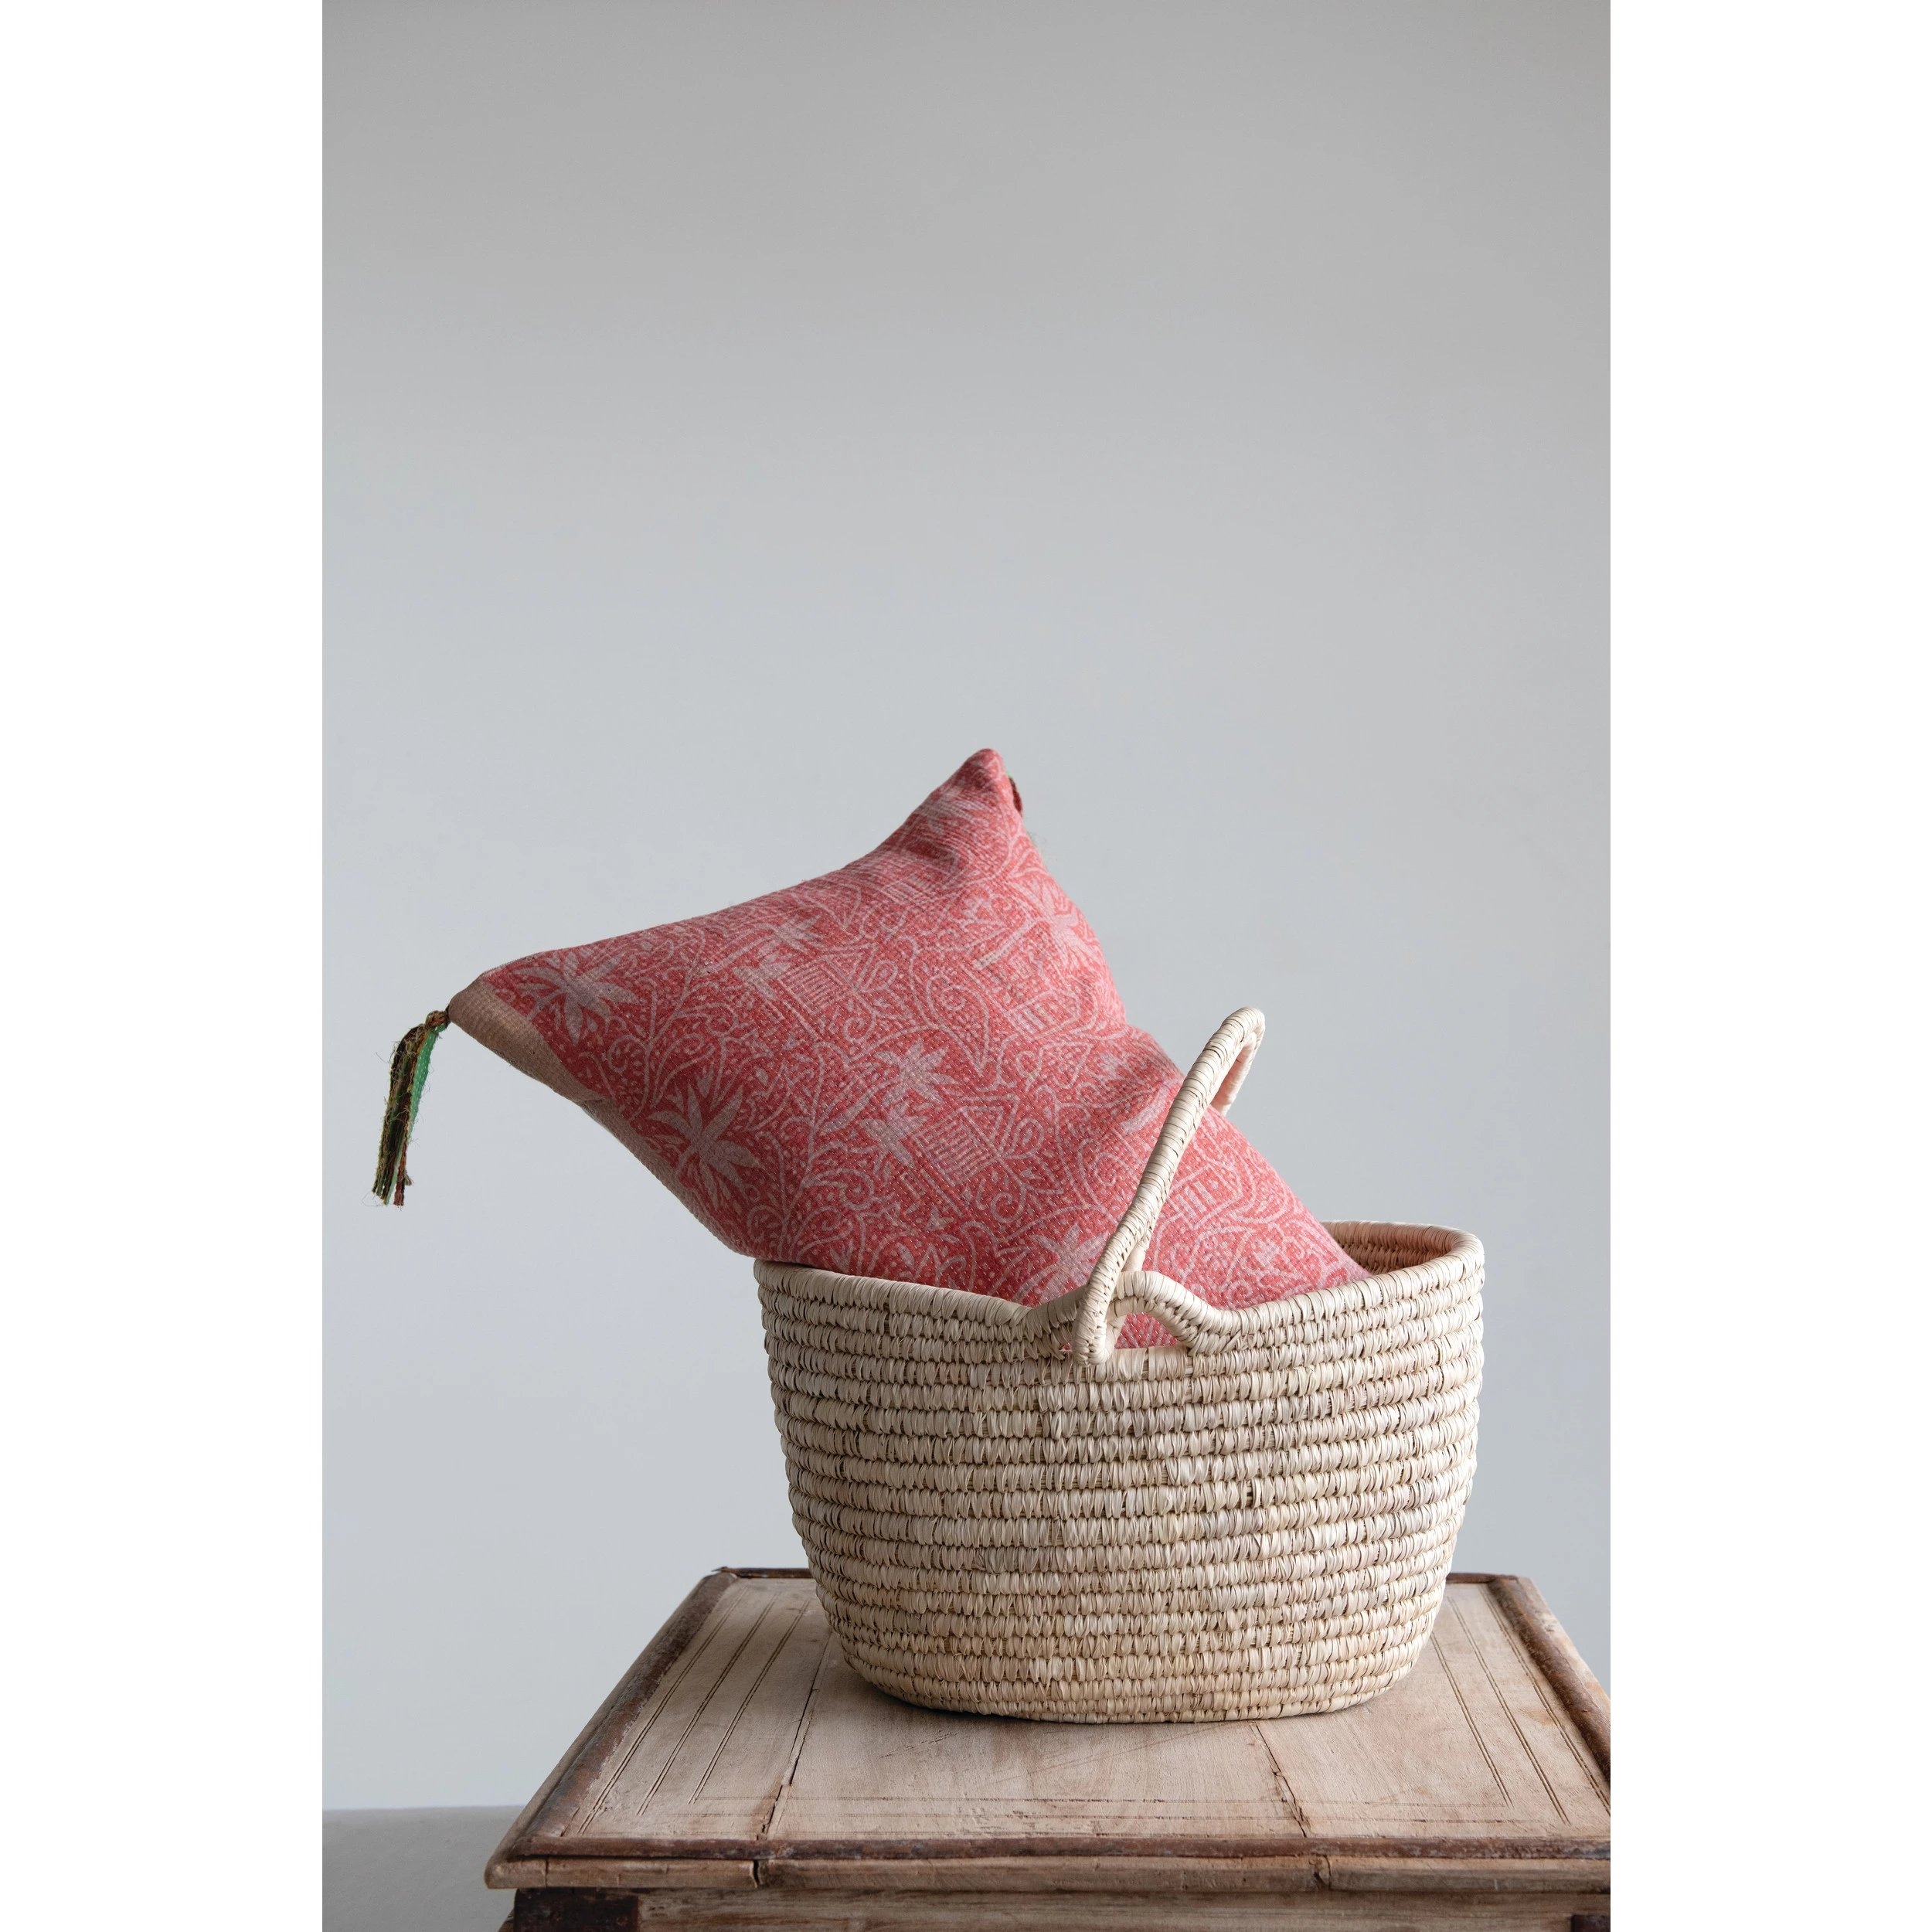 Hand-Woven Grass and Date Leaf Basket with Handle - Image 2